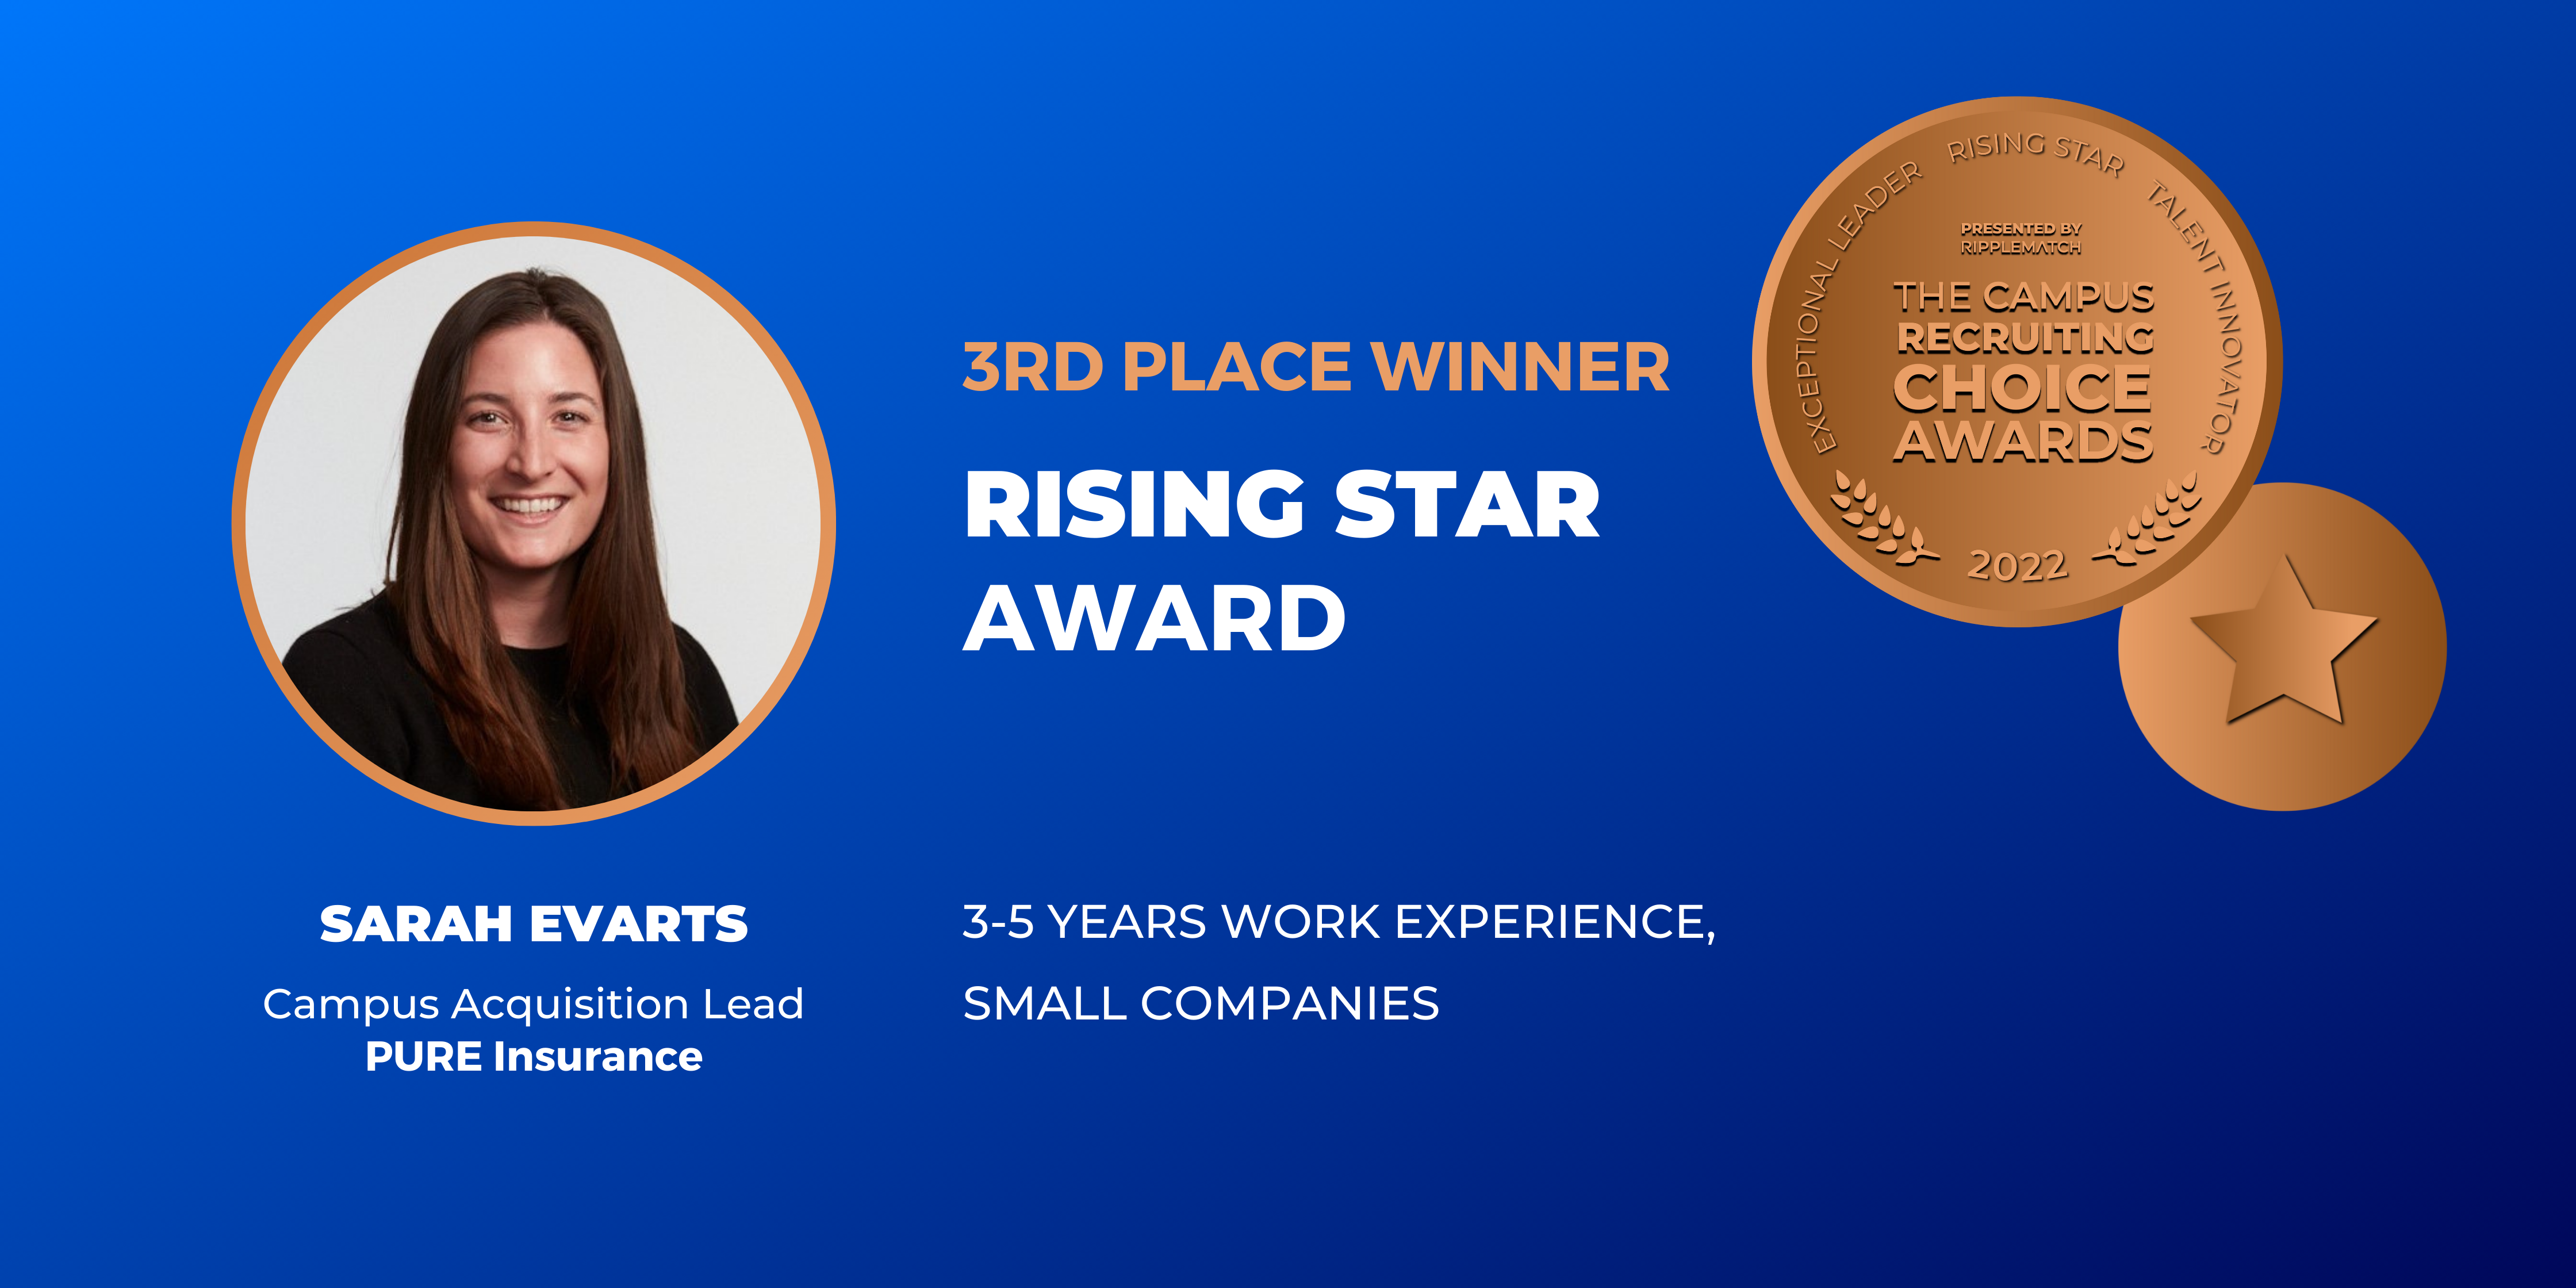 RISING STAR - 3rd place - 3-5 Years Work Experience, Small Companies - Sarah Evarts